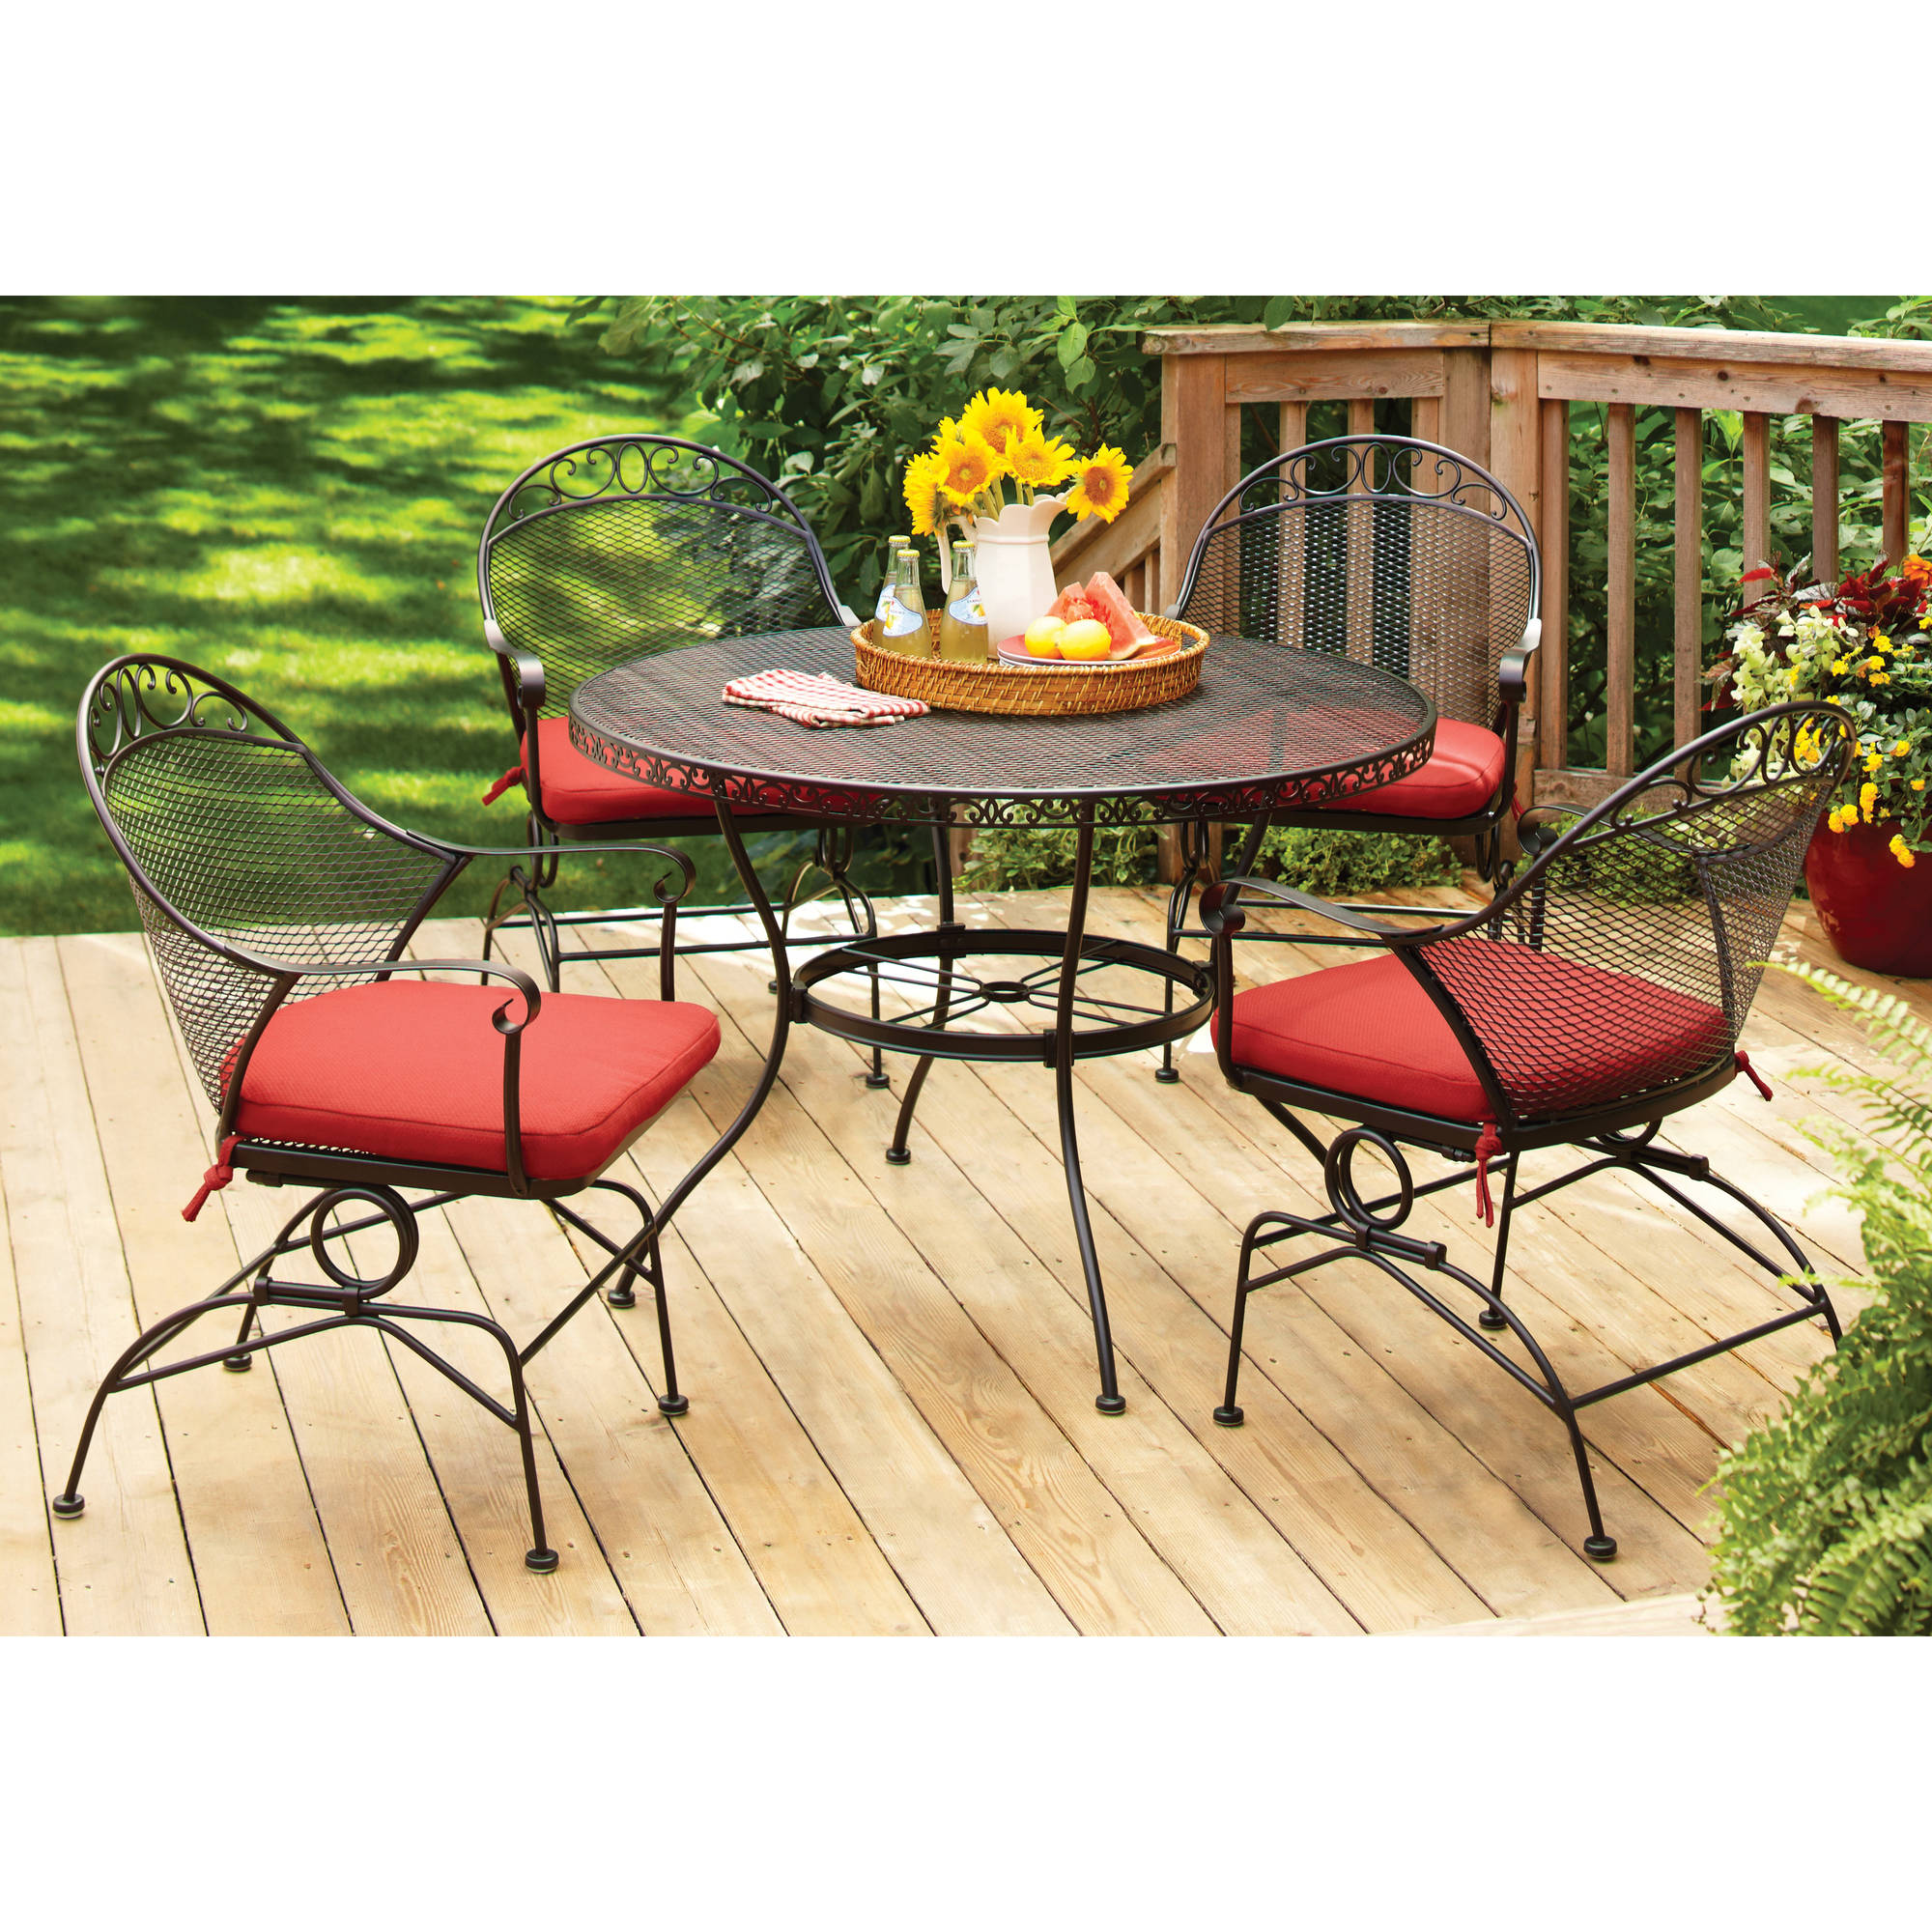 Better Homes and Gardens Wrought Iron Patio Dining Set, Clayton Court Cushioned 5 Piece, Red - image 1 of 11